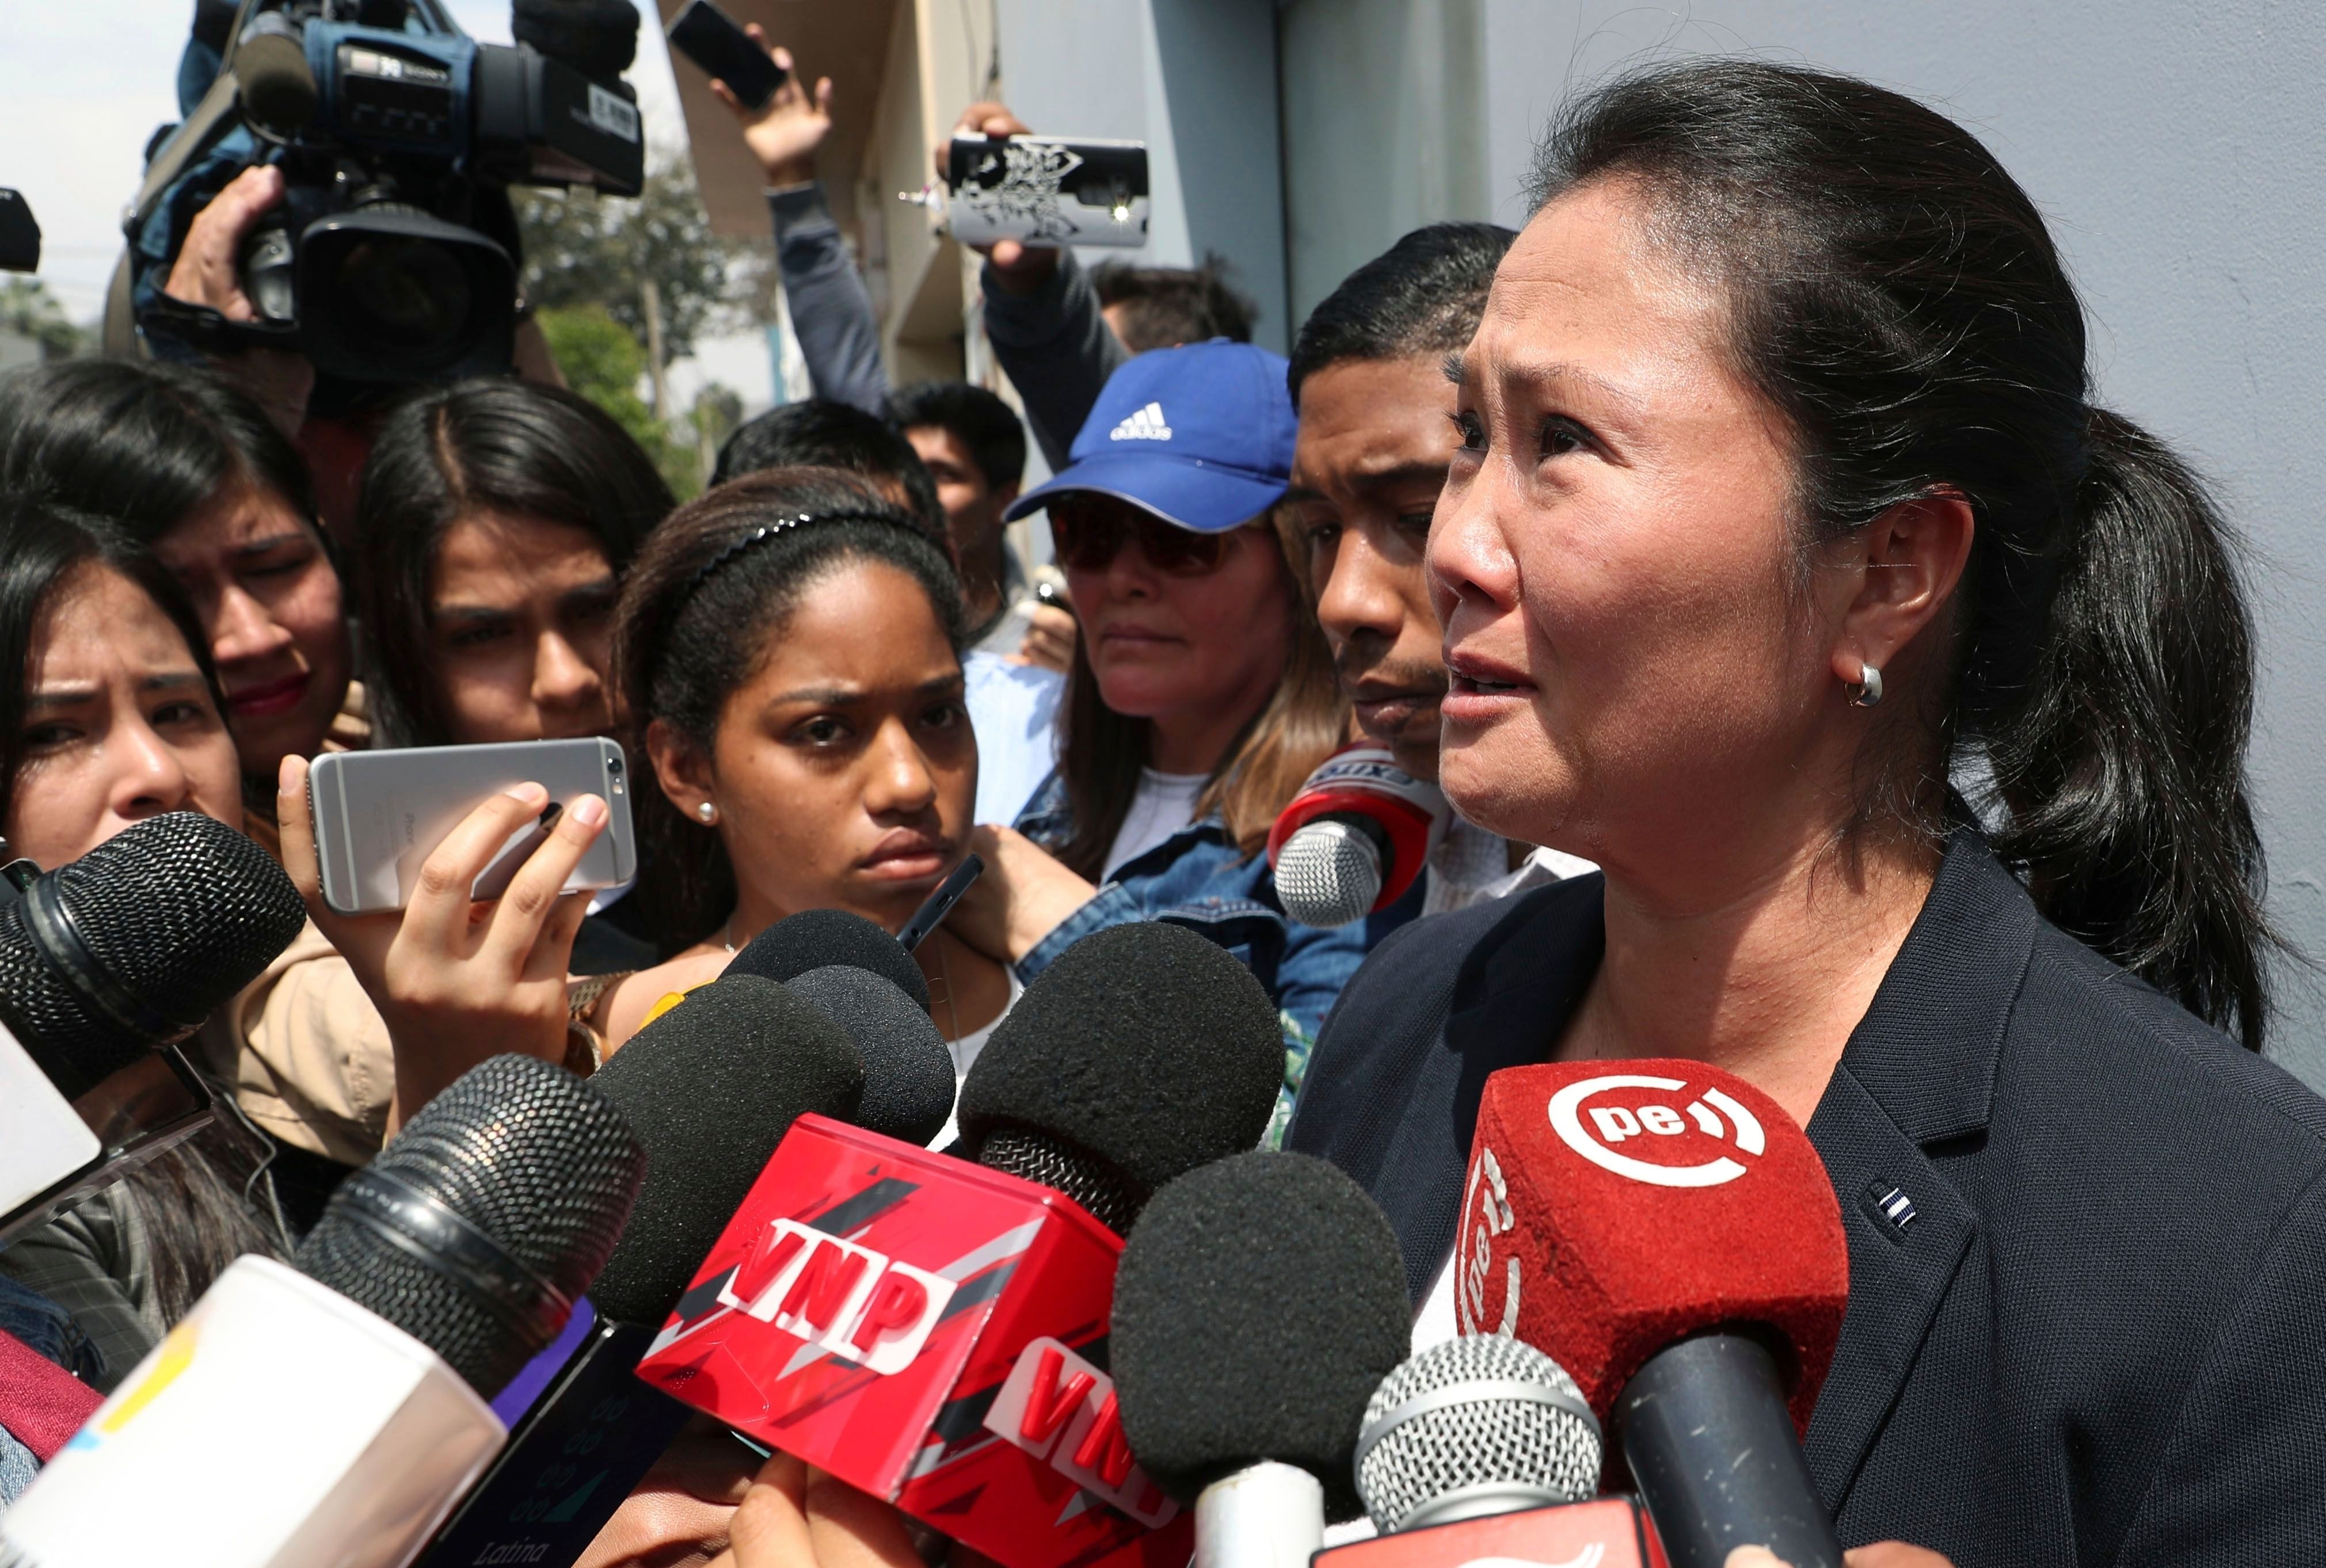 Keiko Fujimori, daughter of Peru's former President Alberto Fujimori, cries as she speaks with reporters outside of her father's home in Lima, Peru, on Oct. 3. Peru's Supreme Court has overturned a medical pardon for former President Alberto Fujimori and ordered the strongman be returned to jail to serve out a long sentence for human rights abuses. On Wednesday, Keiko Fujimori was detained as a result of a campaign finance probe. (Martin Mejia—AP/REX/Shutterstock)